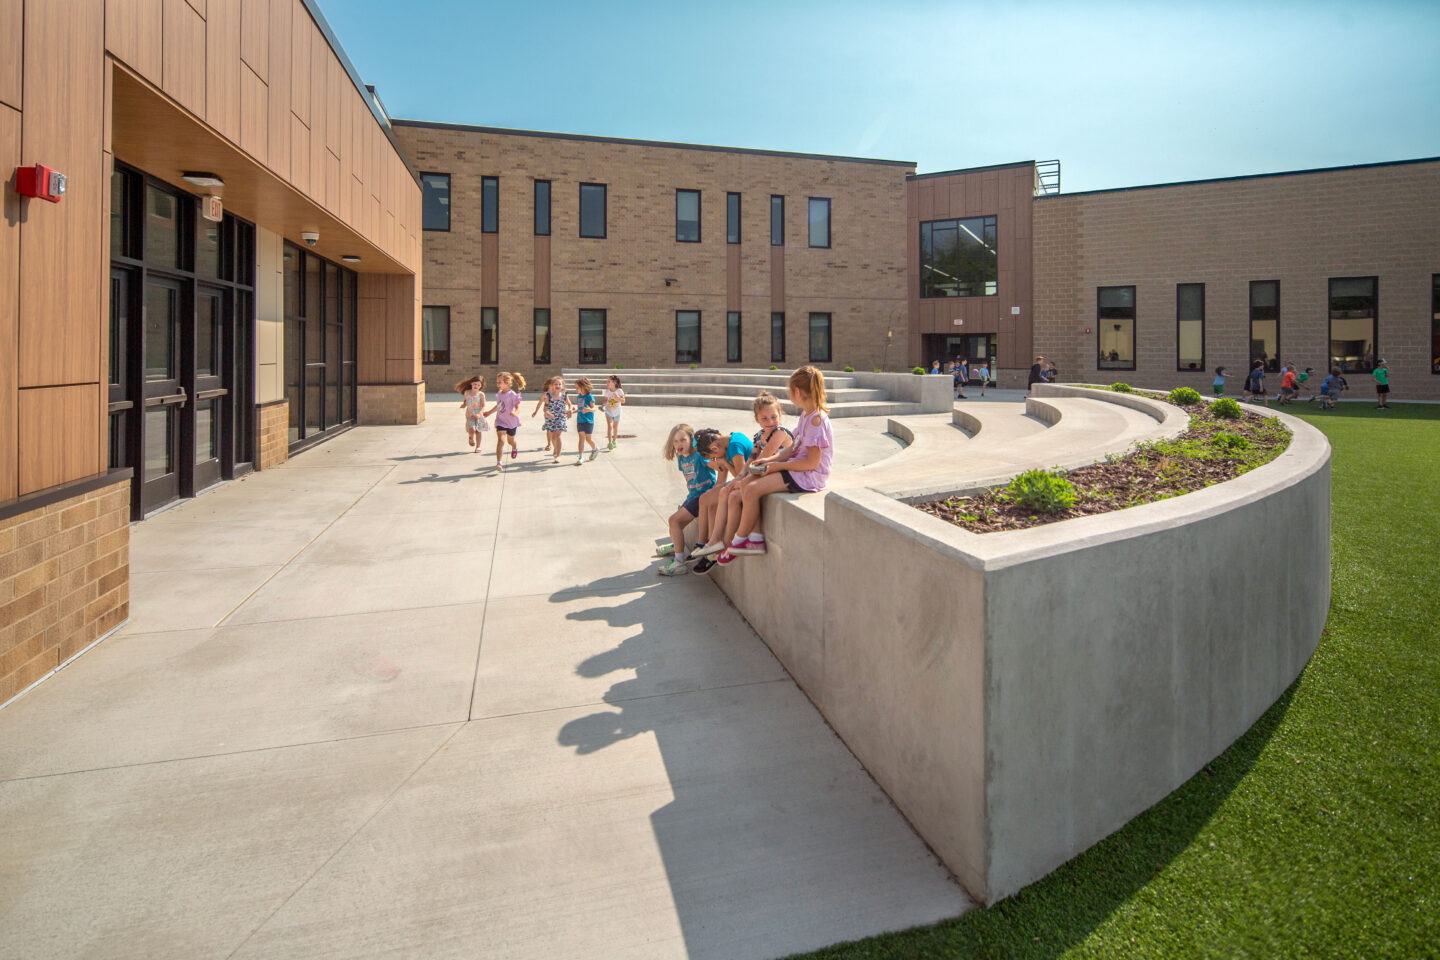 Courtyard with outdoor classroom teaching steps at Columbus Elementary School